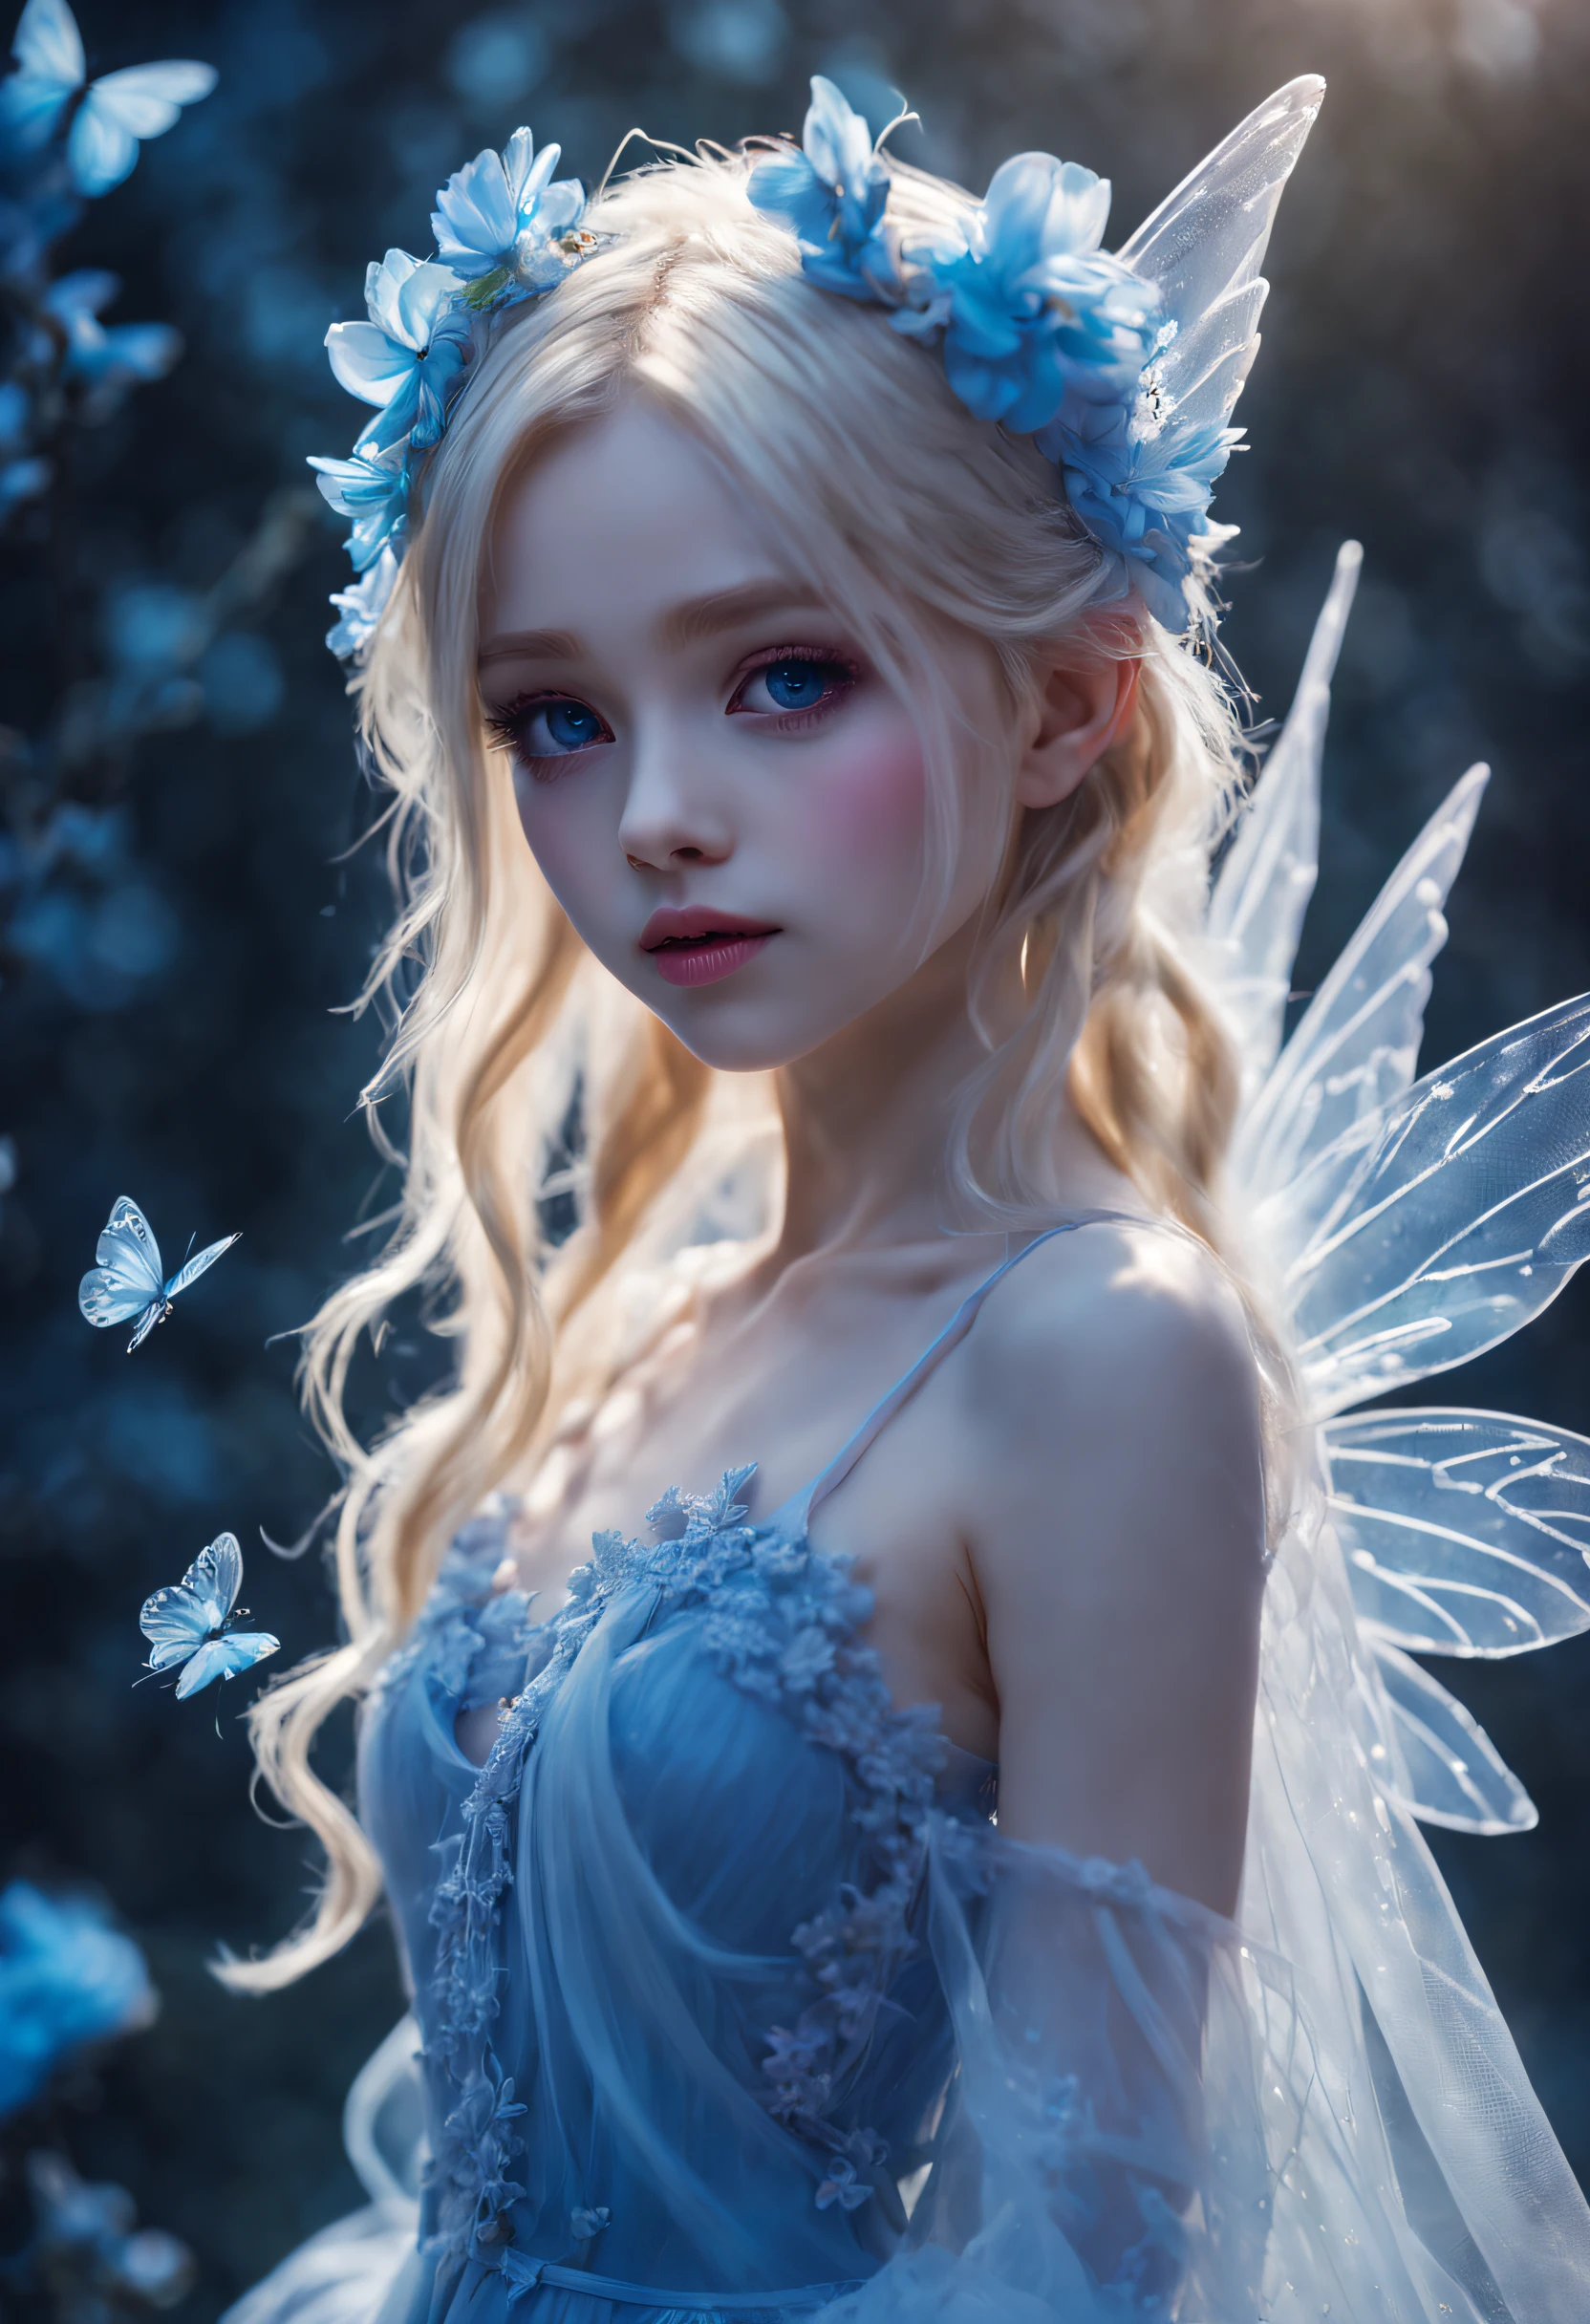 A high resolution,Best quality ,Blonde girl,Face up，the Flower Fairy，Fairy-like transparent wings，Composition in the play，delicated face，8K。blue tint，high light，rim-light，